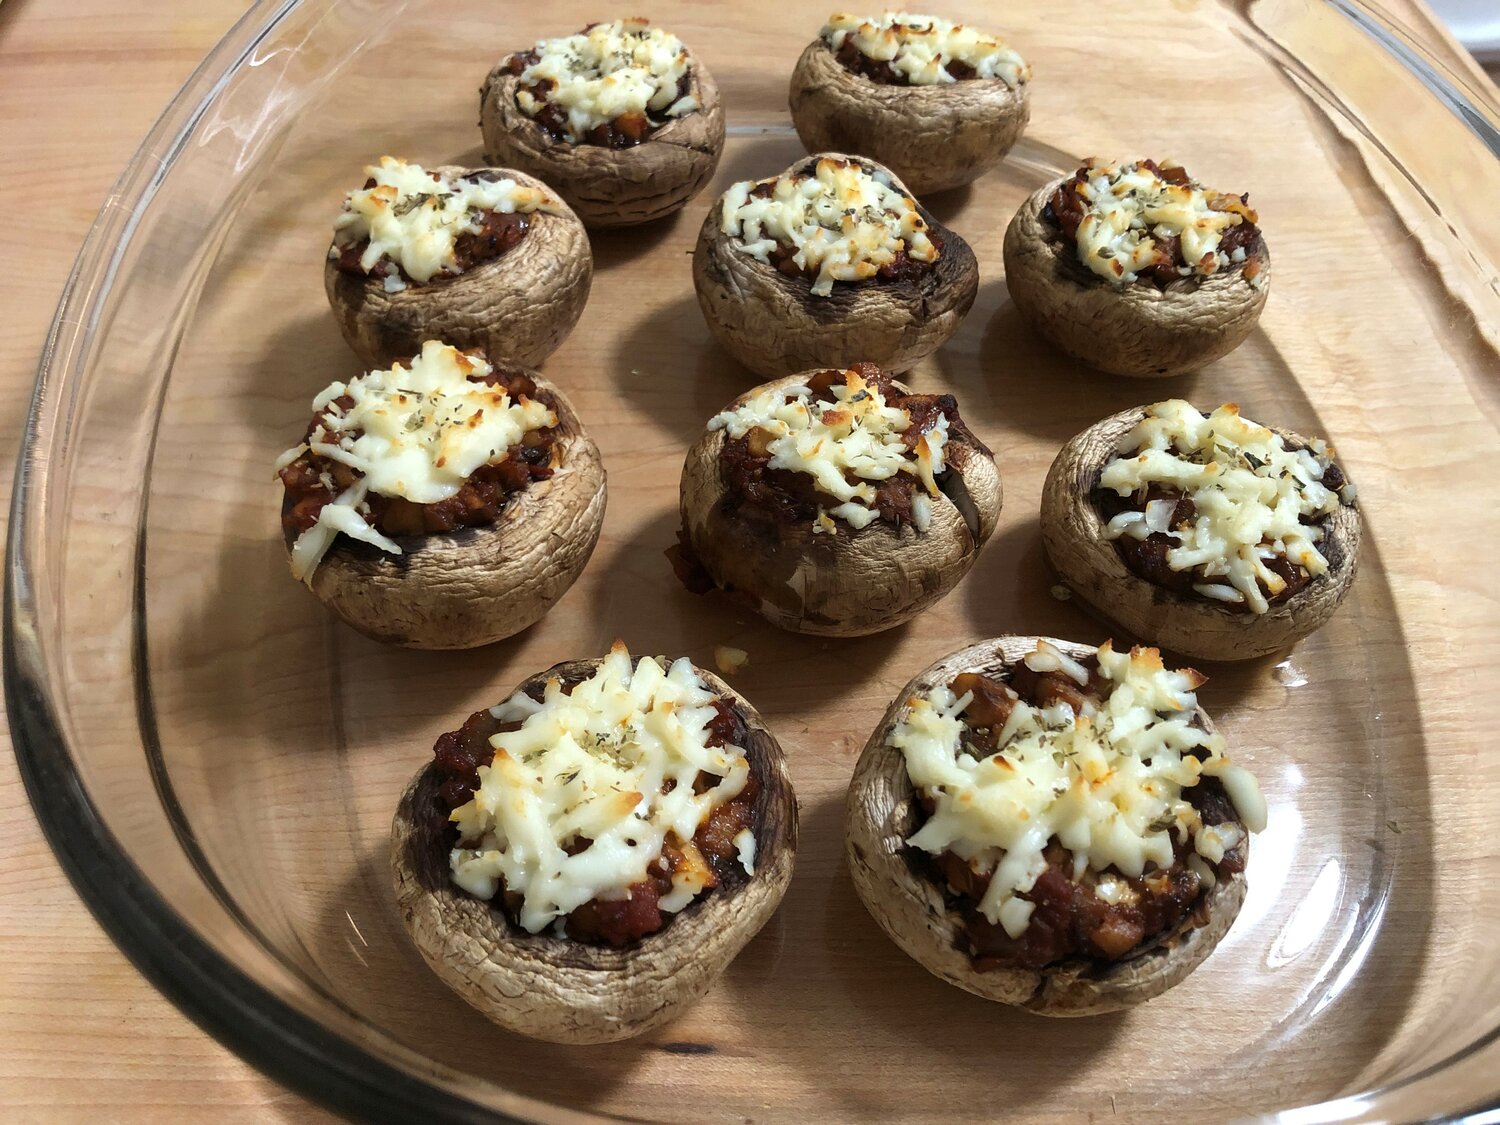 These delicious stuffed mushrooms can fit many dietary preferences, including keto.